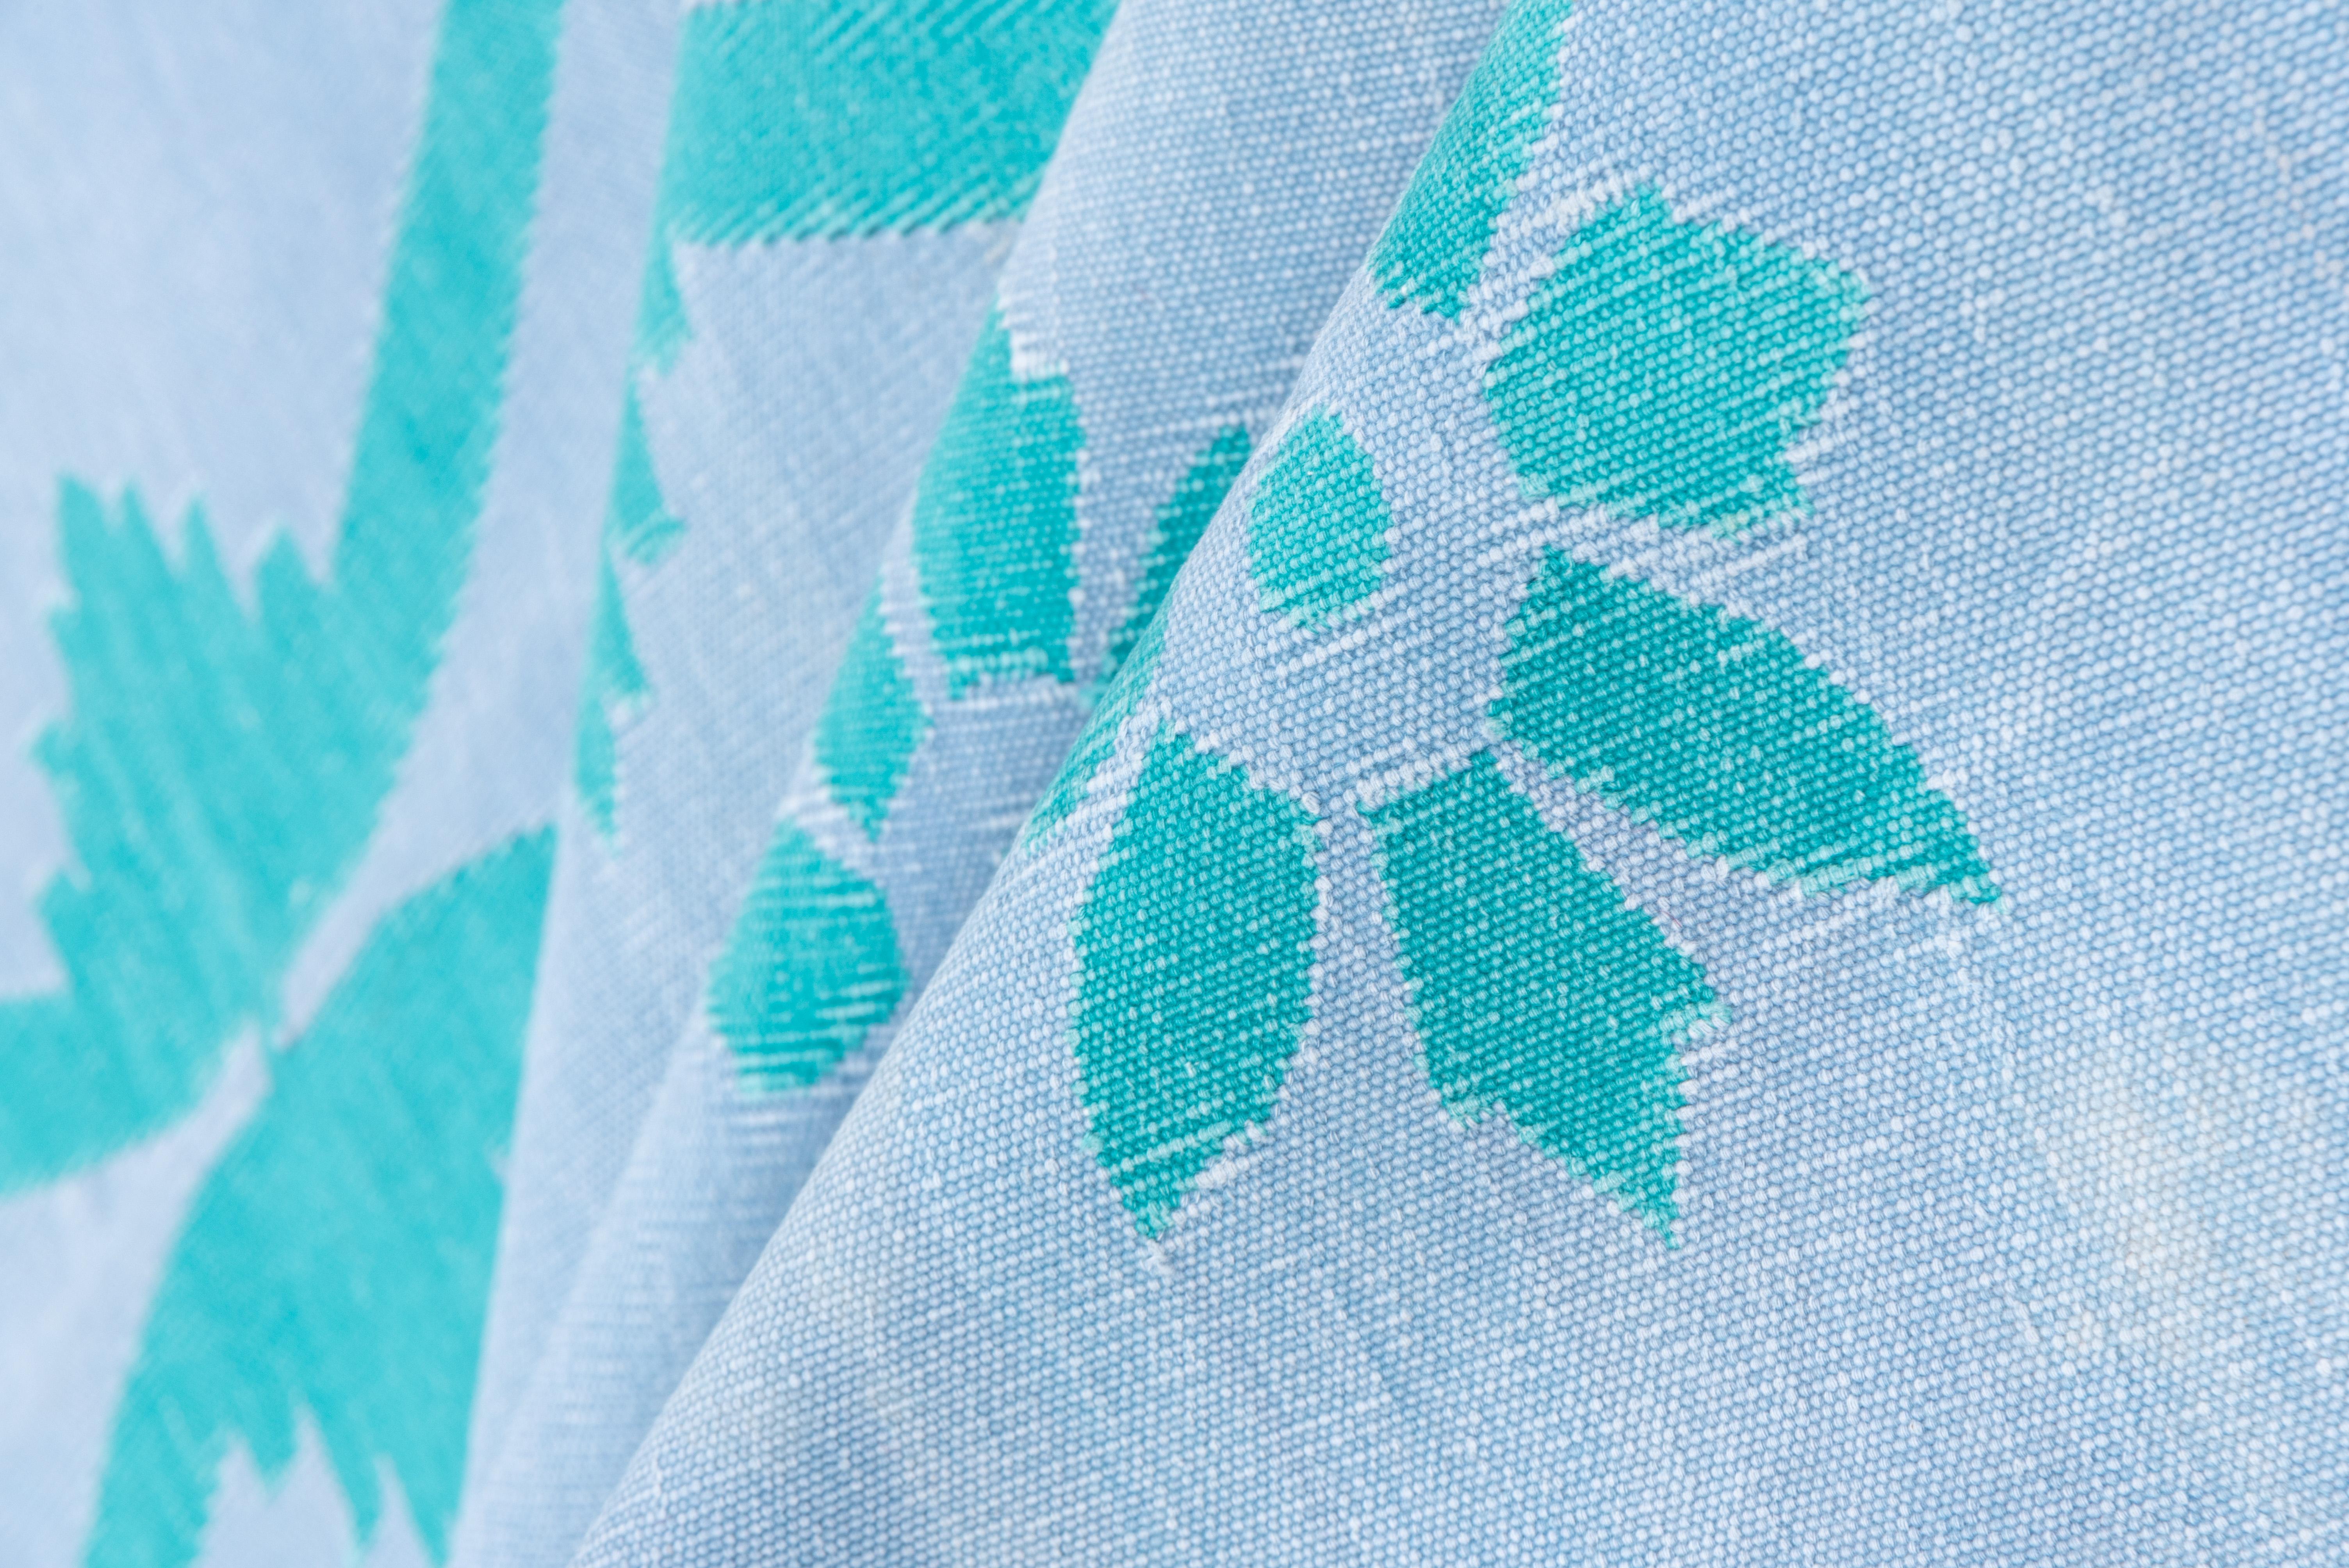 The vertical undulations are in teal while the ground is a light baby blue. In both pieces, the pattern slips under the borders at the ends while fitting neatly laterally. All cotton construction.